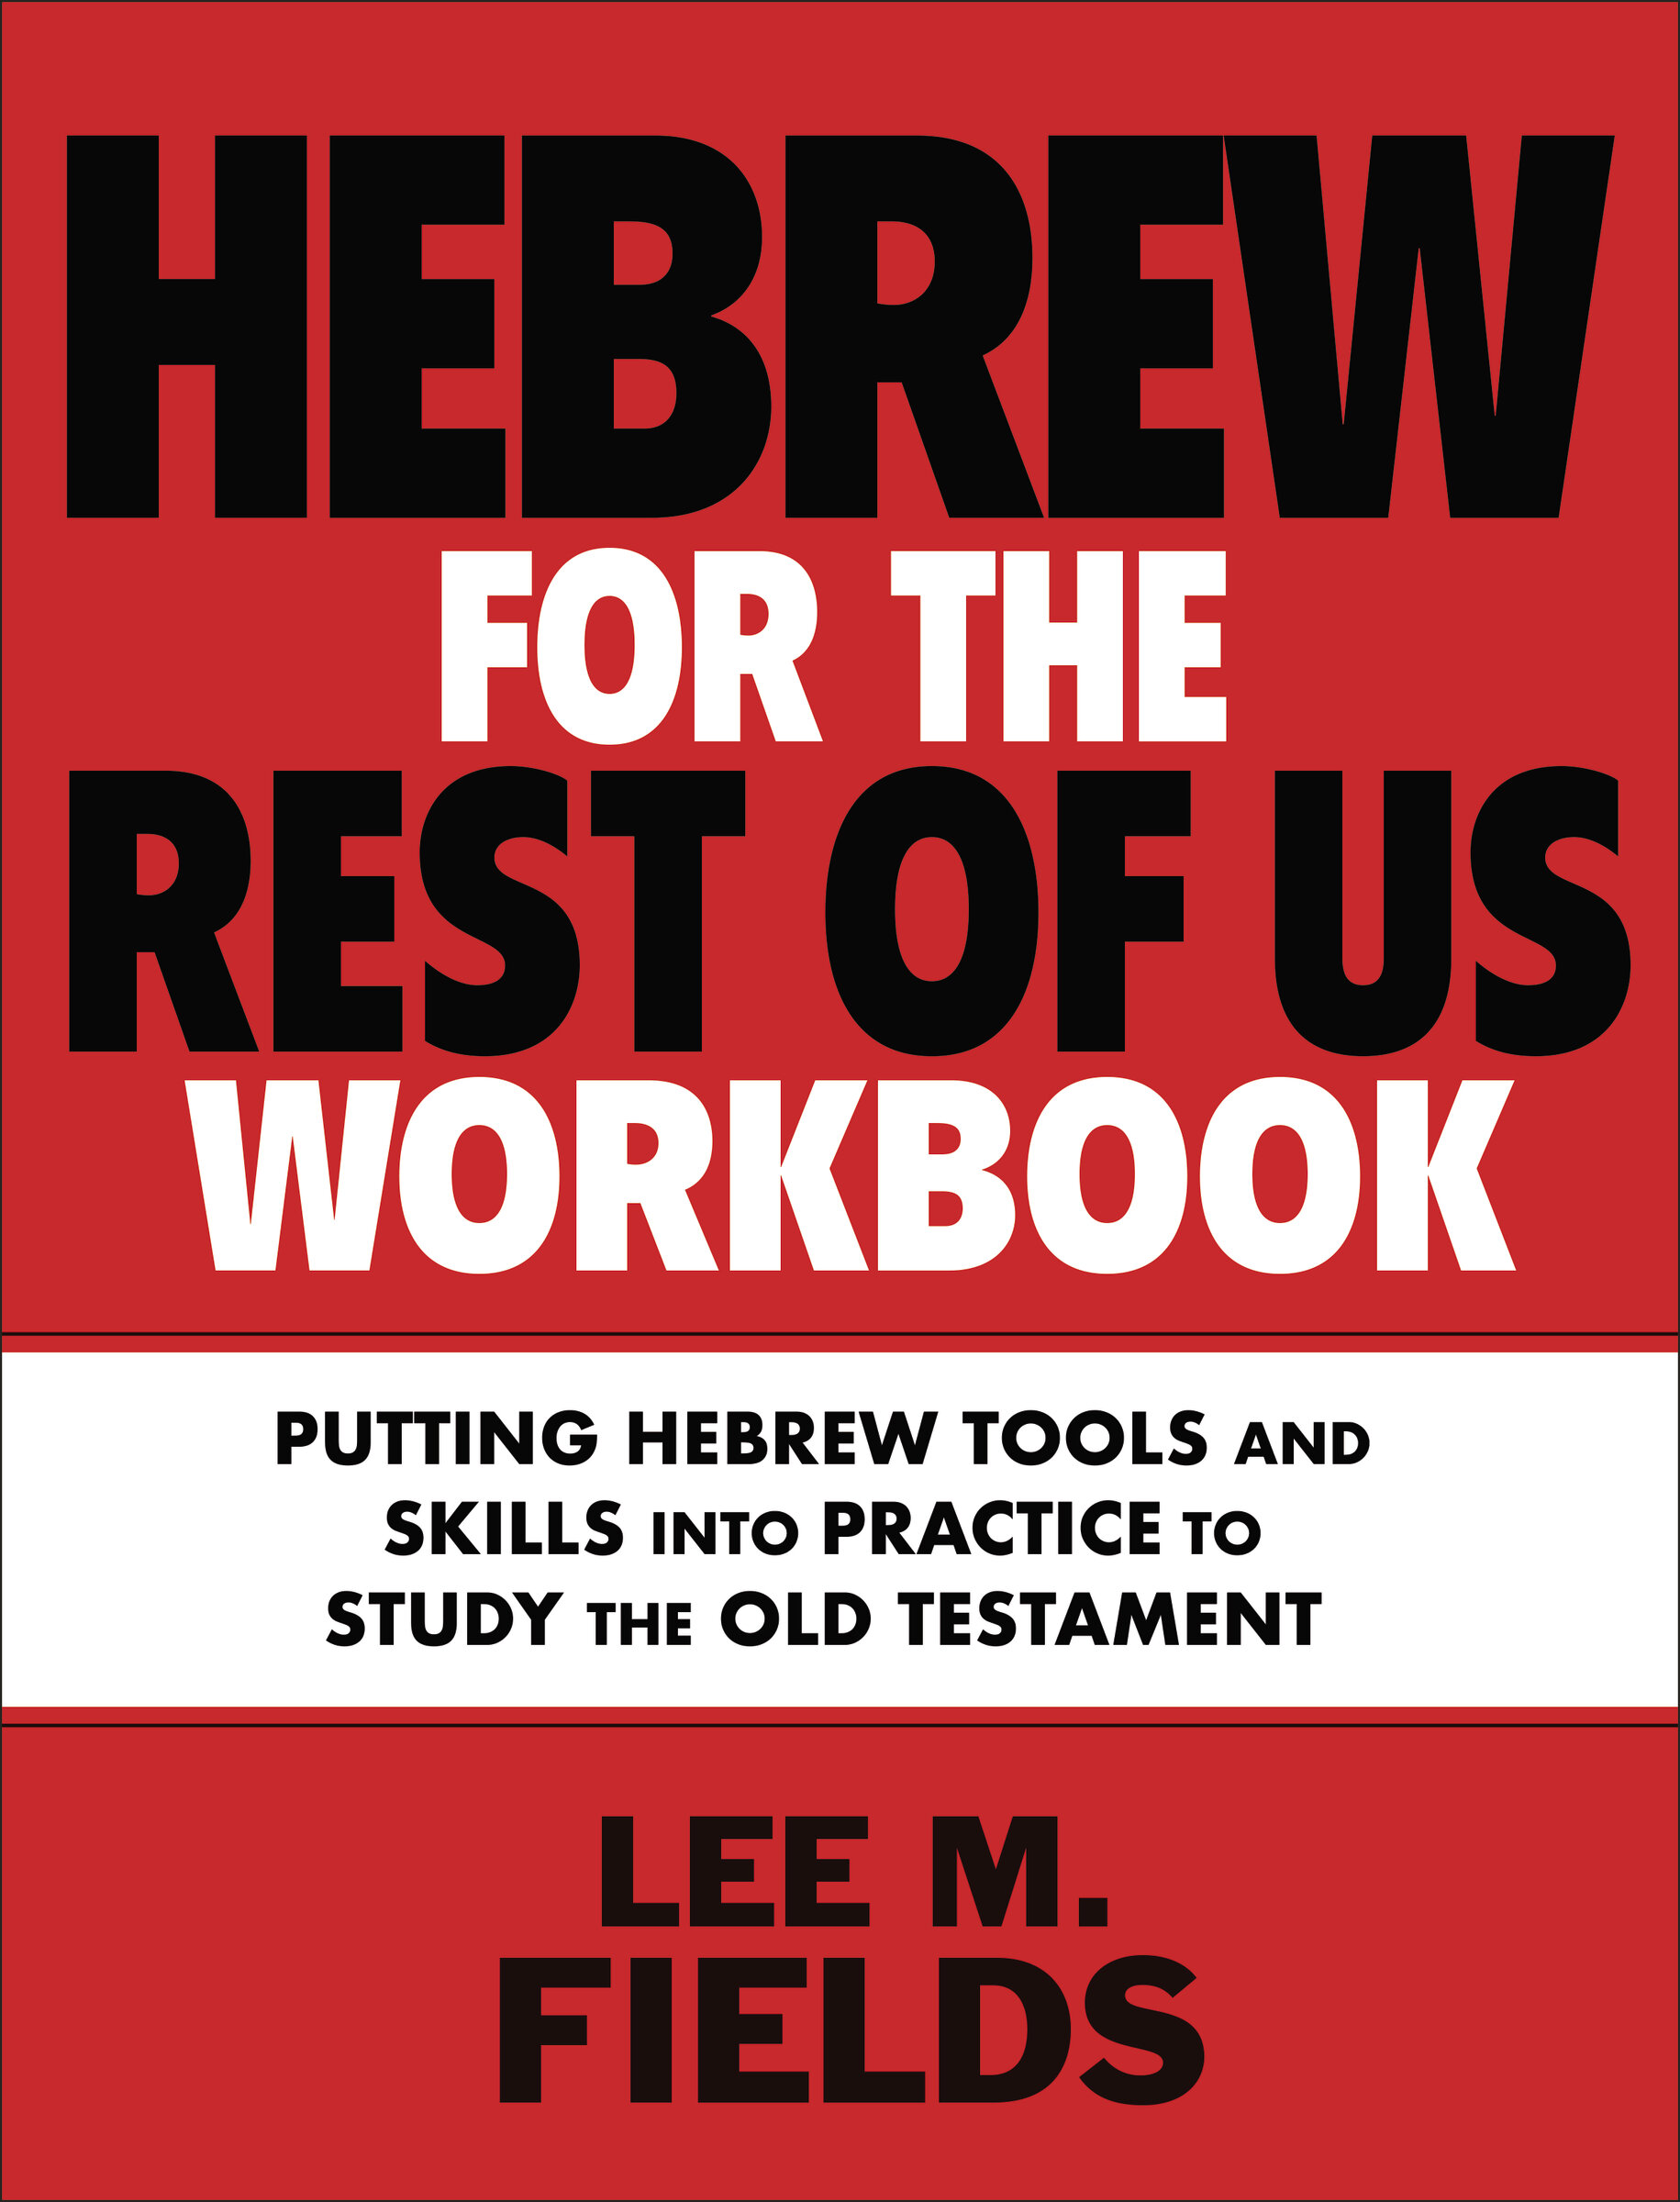 Hebrew for the Rest of Us Workbook: Putting Hebrew Tools and Skills into Practice to Study the Old Testament